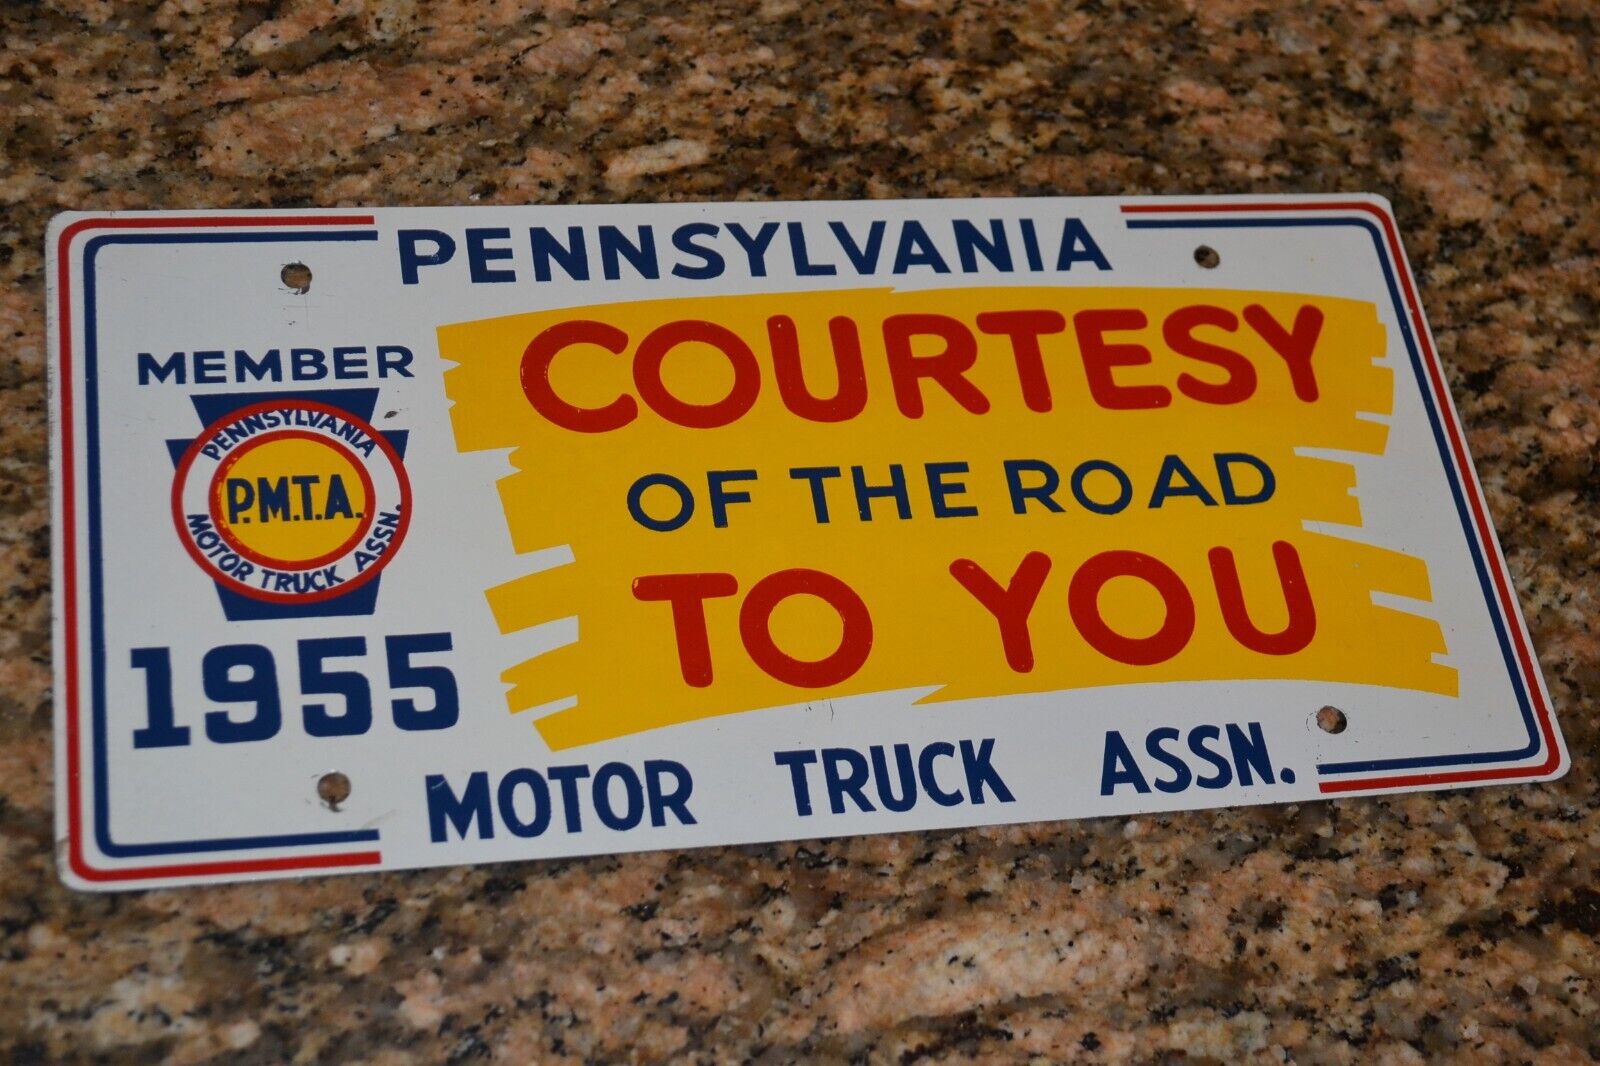 VINTAGE 1955 P.M.T.A. COURTESY OF THE ROAD TO YOU LICENSE PLATE PENNSYLVANIA PA.